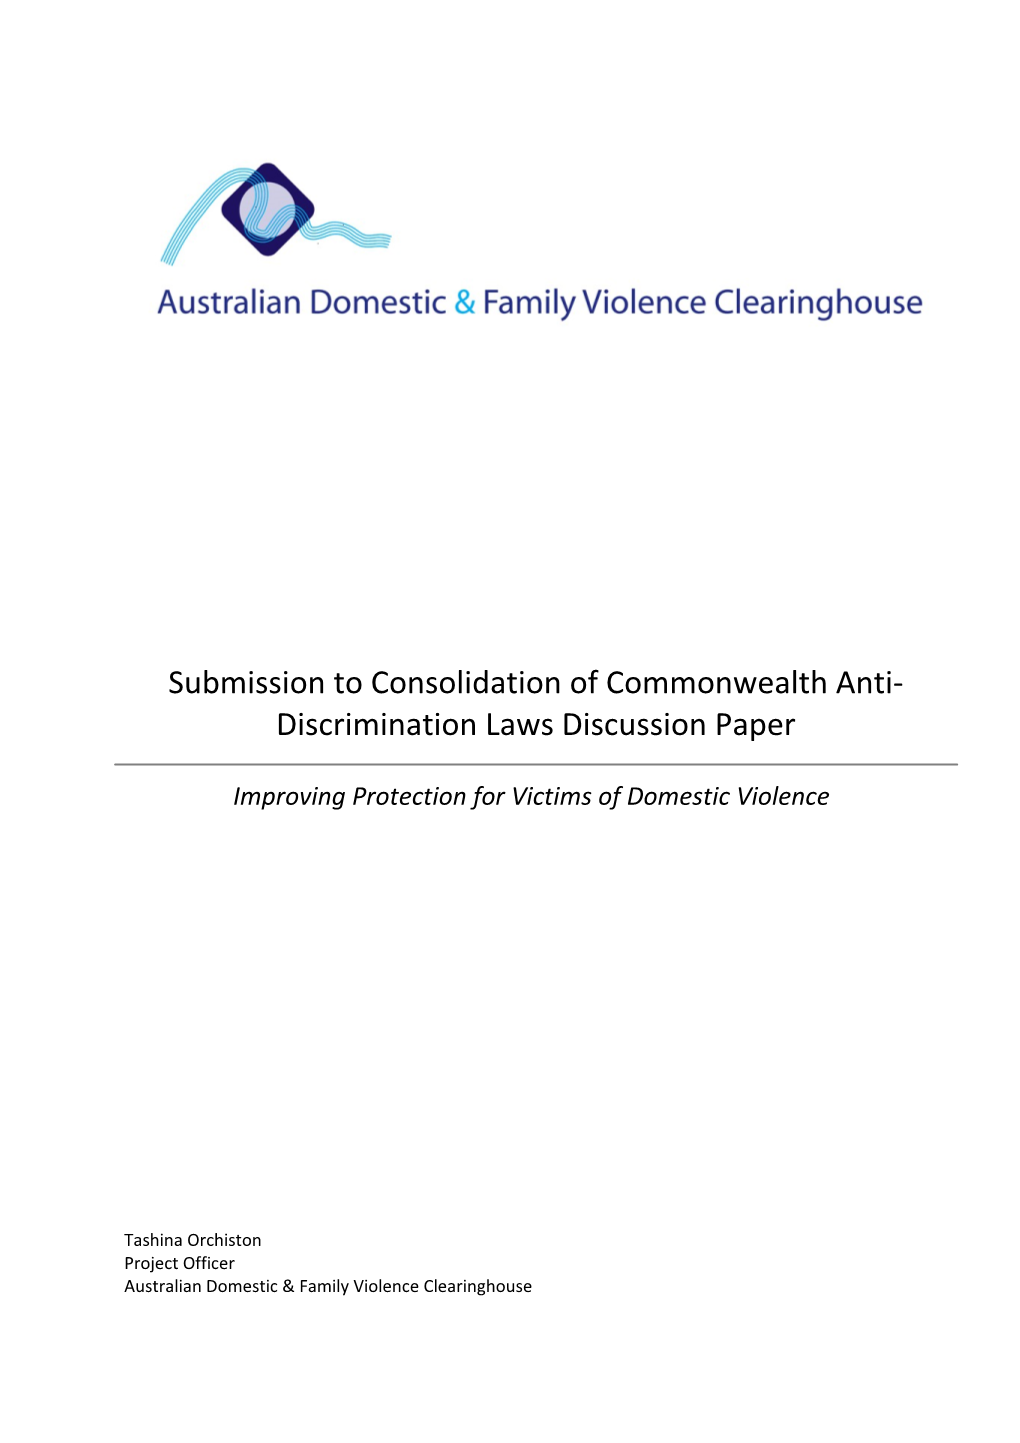 Submission on the Consolidation of Commonwealth Anti-Discrimination Laws - Family Violence